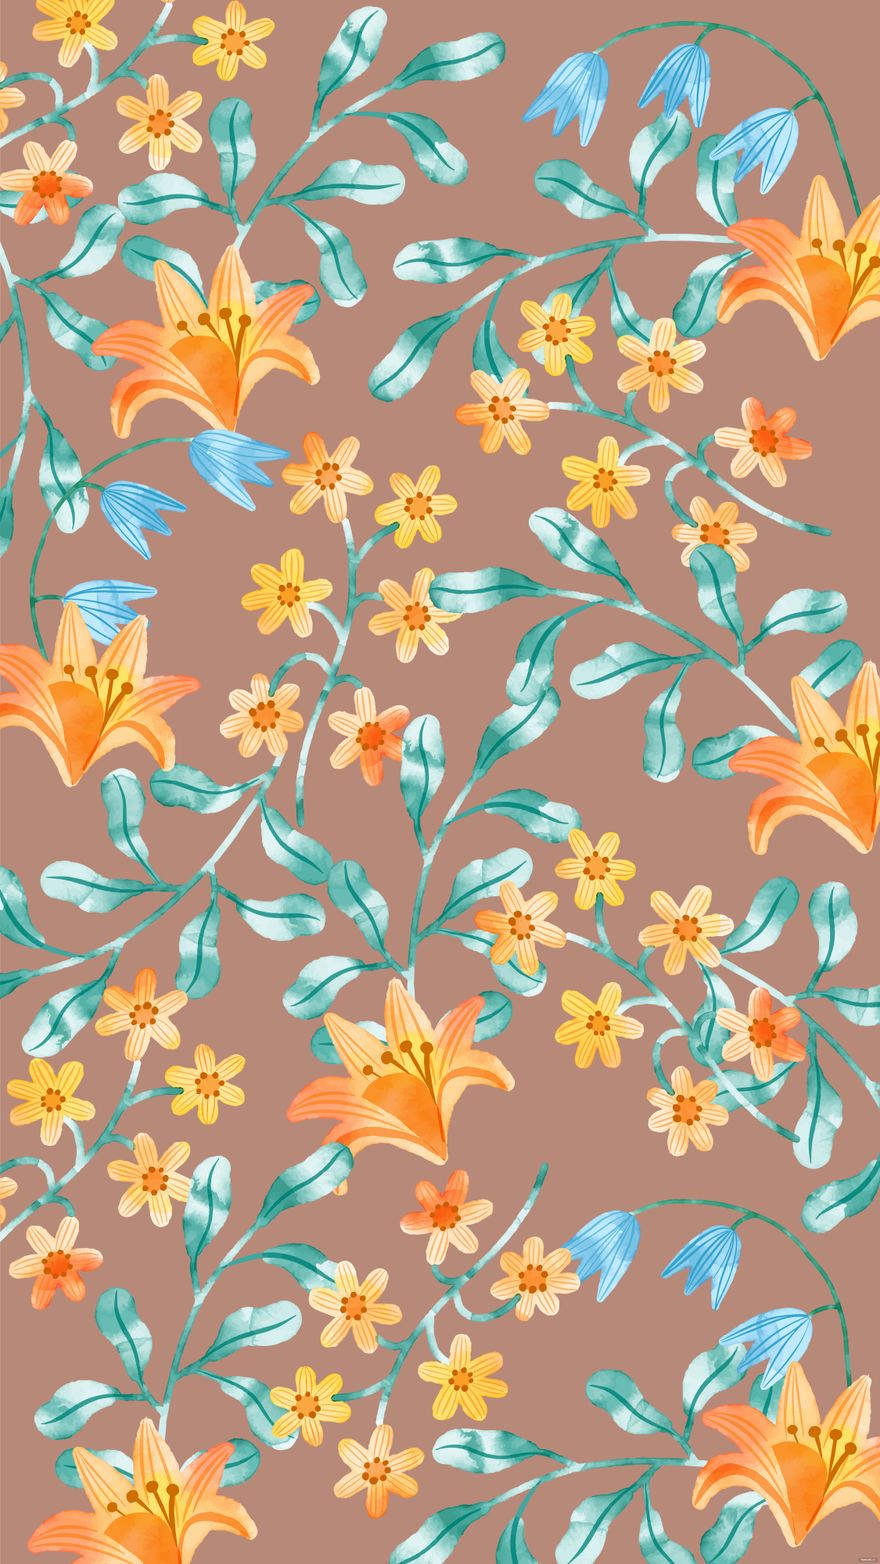 Aesthetic Retro Floral Background